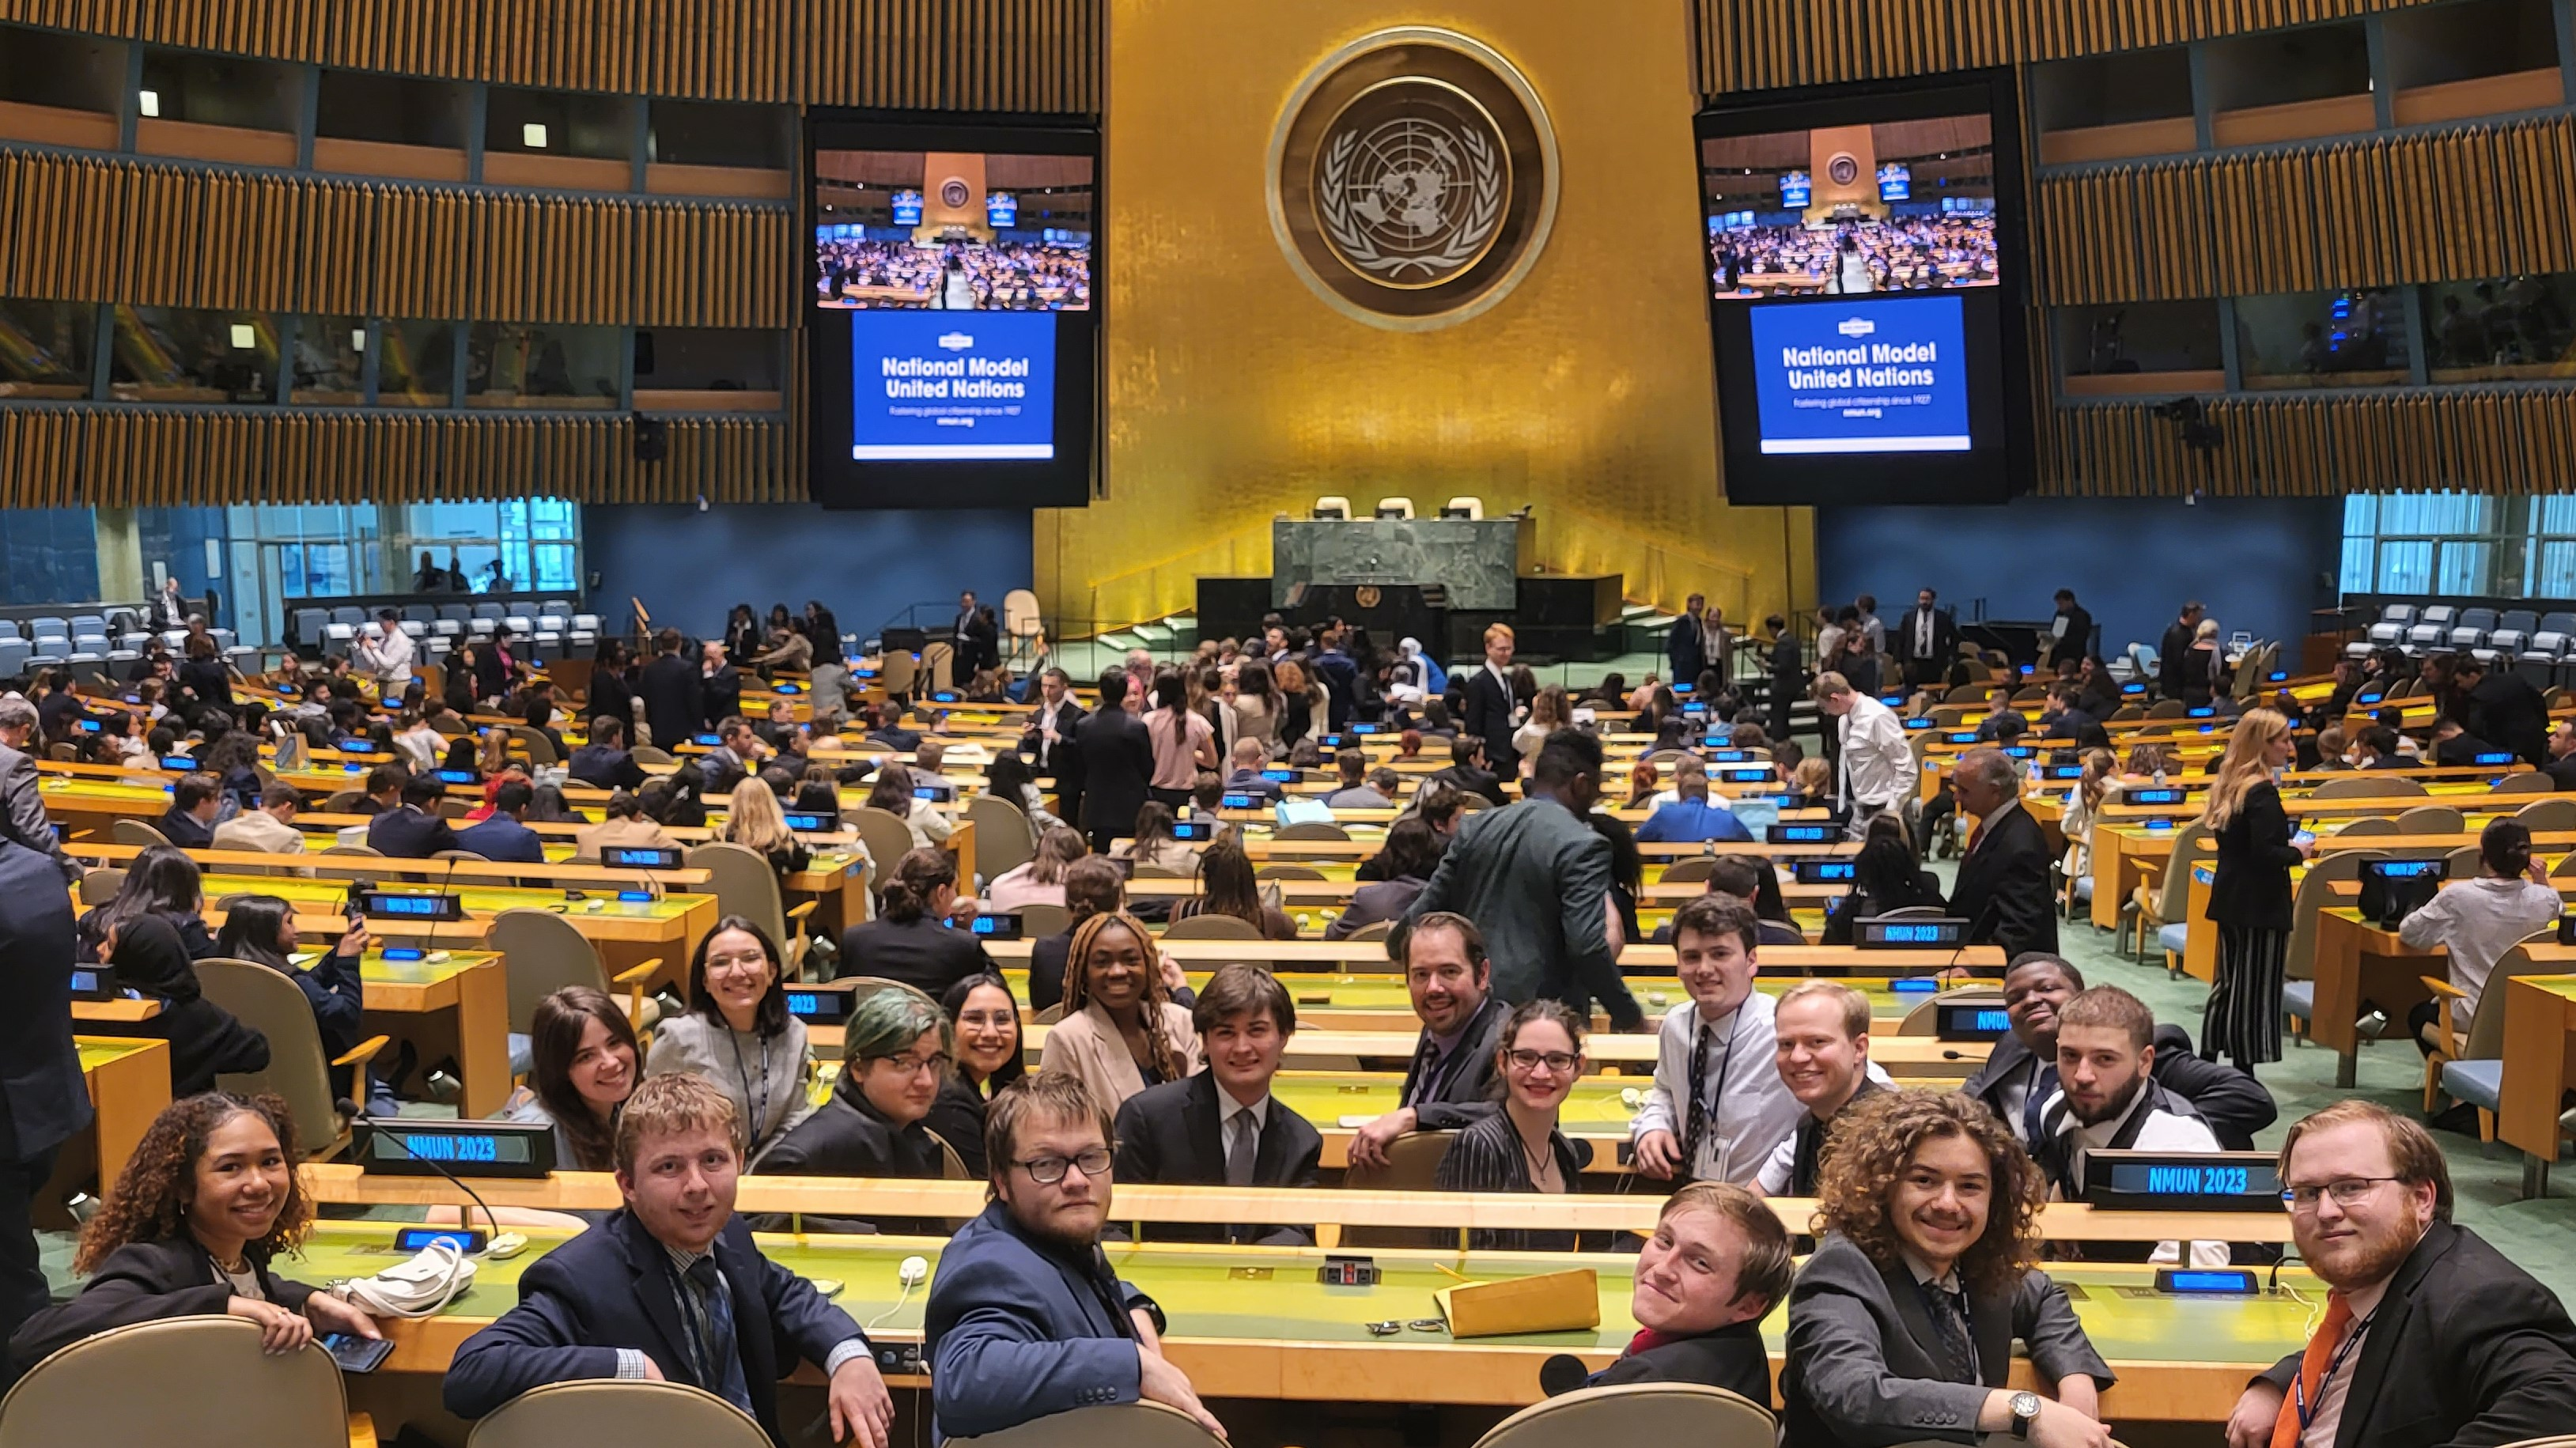 MUN students pictured sitting in the UN General Assembly Hall